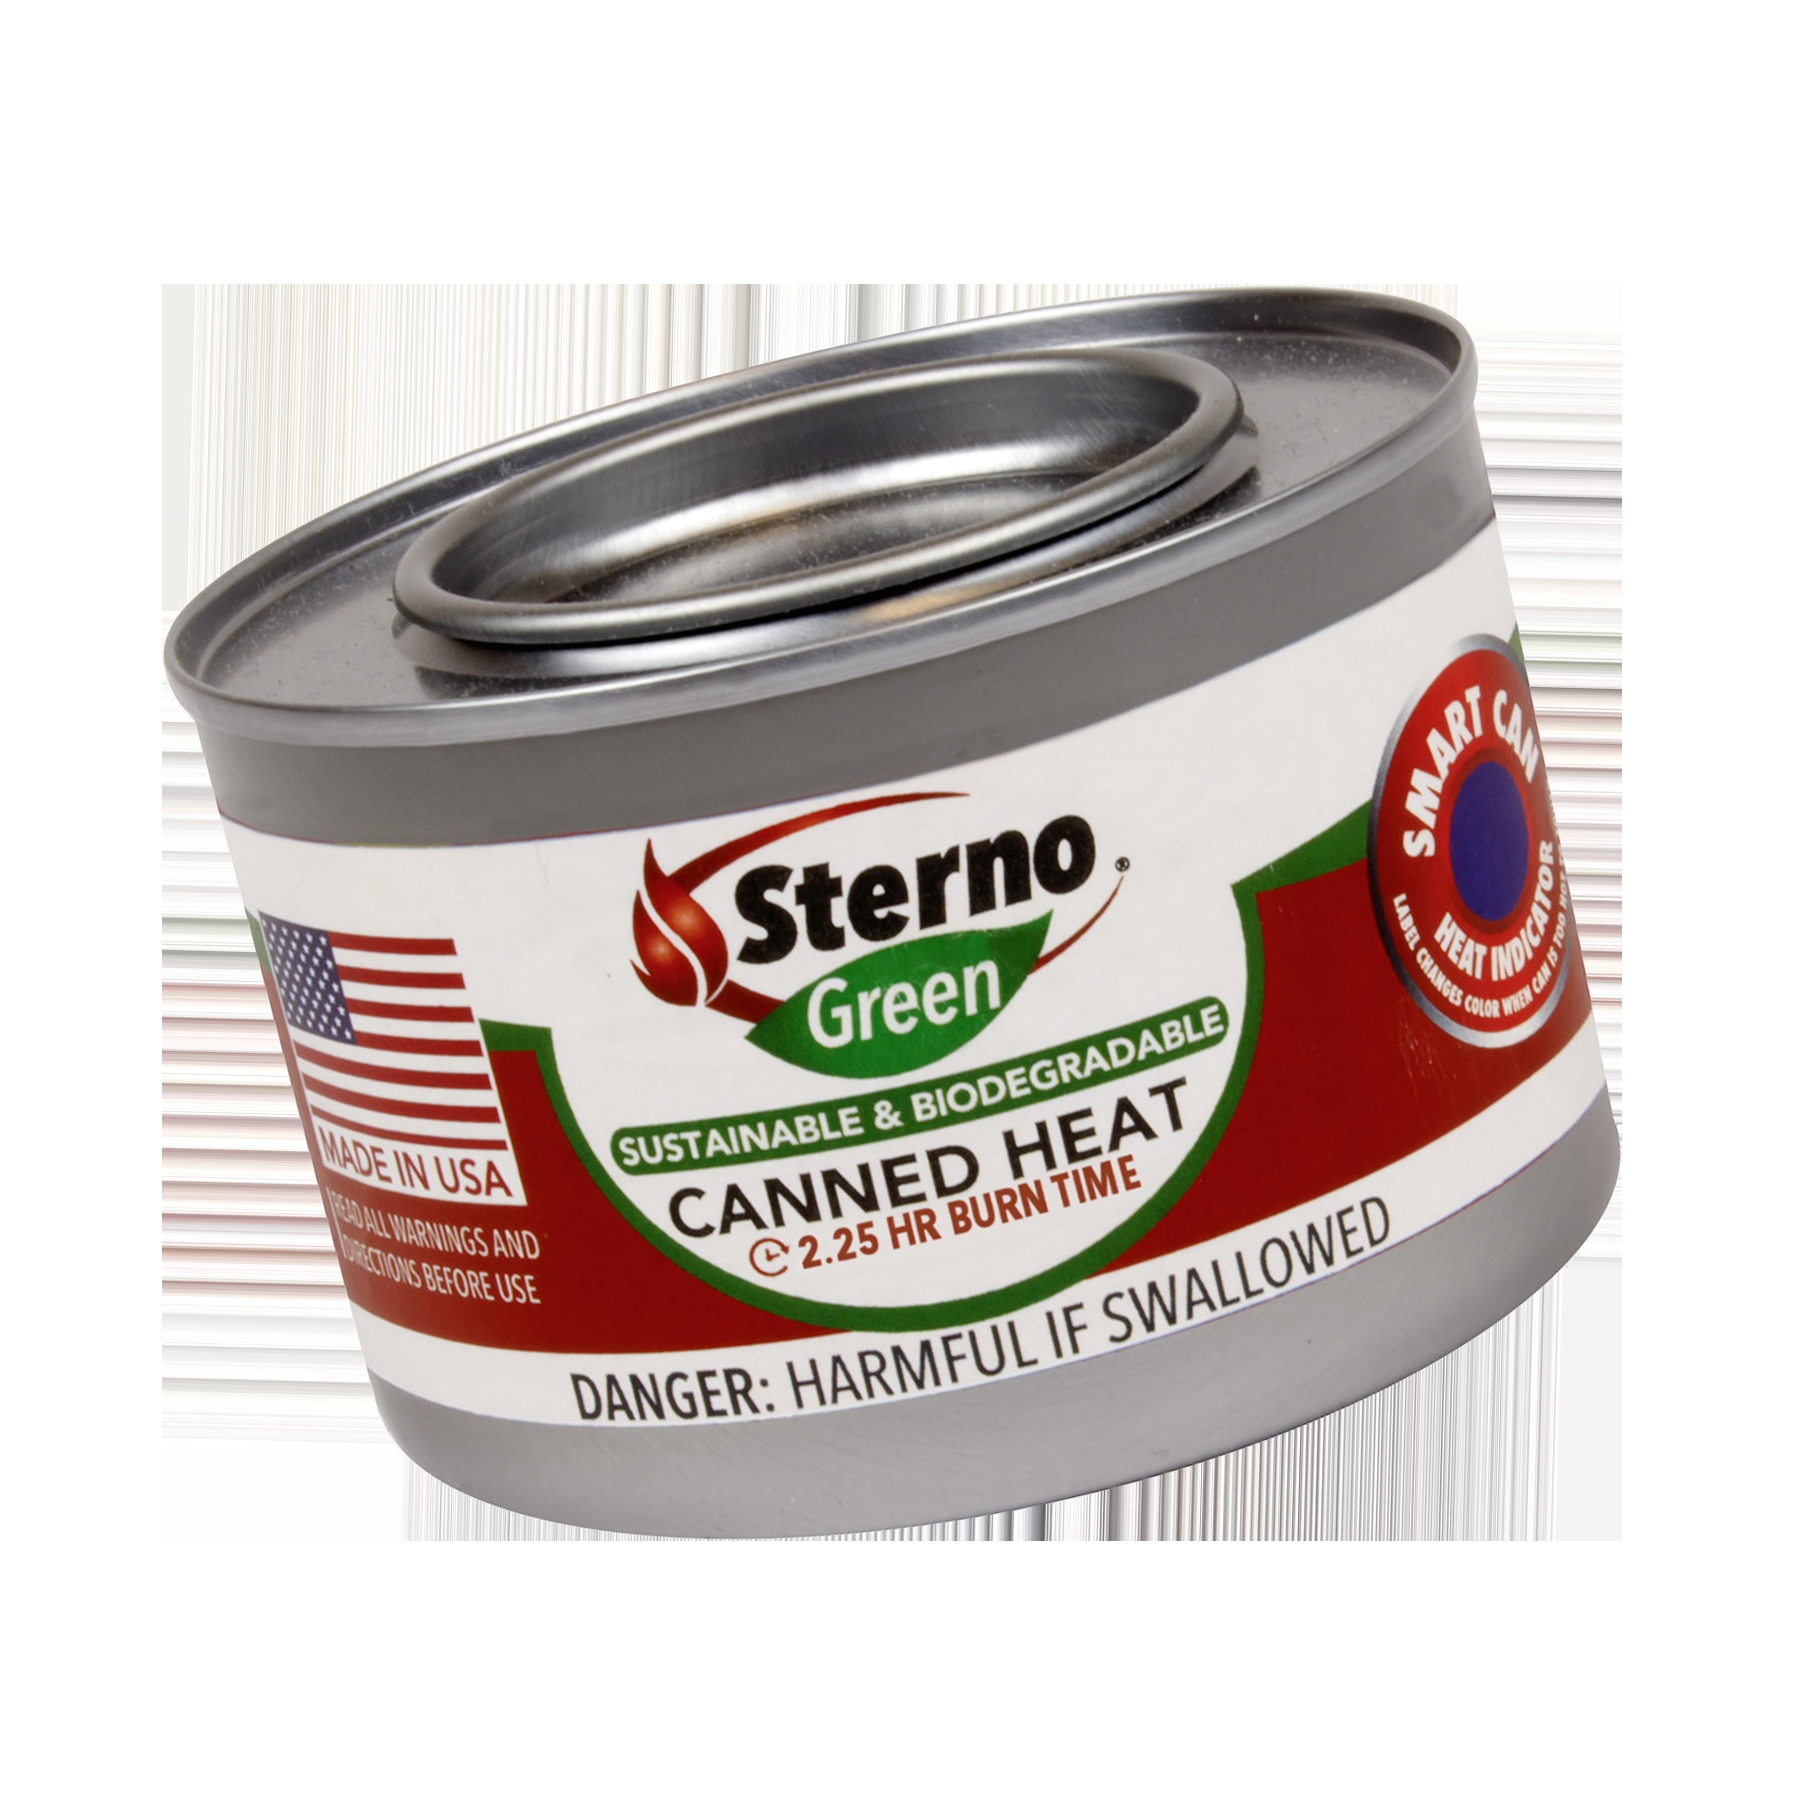 spills and a smartcan heat indicator letting you know when the can is too hot to touch no matter the occasion sterno fuels will meet your needs